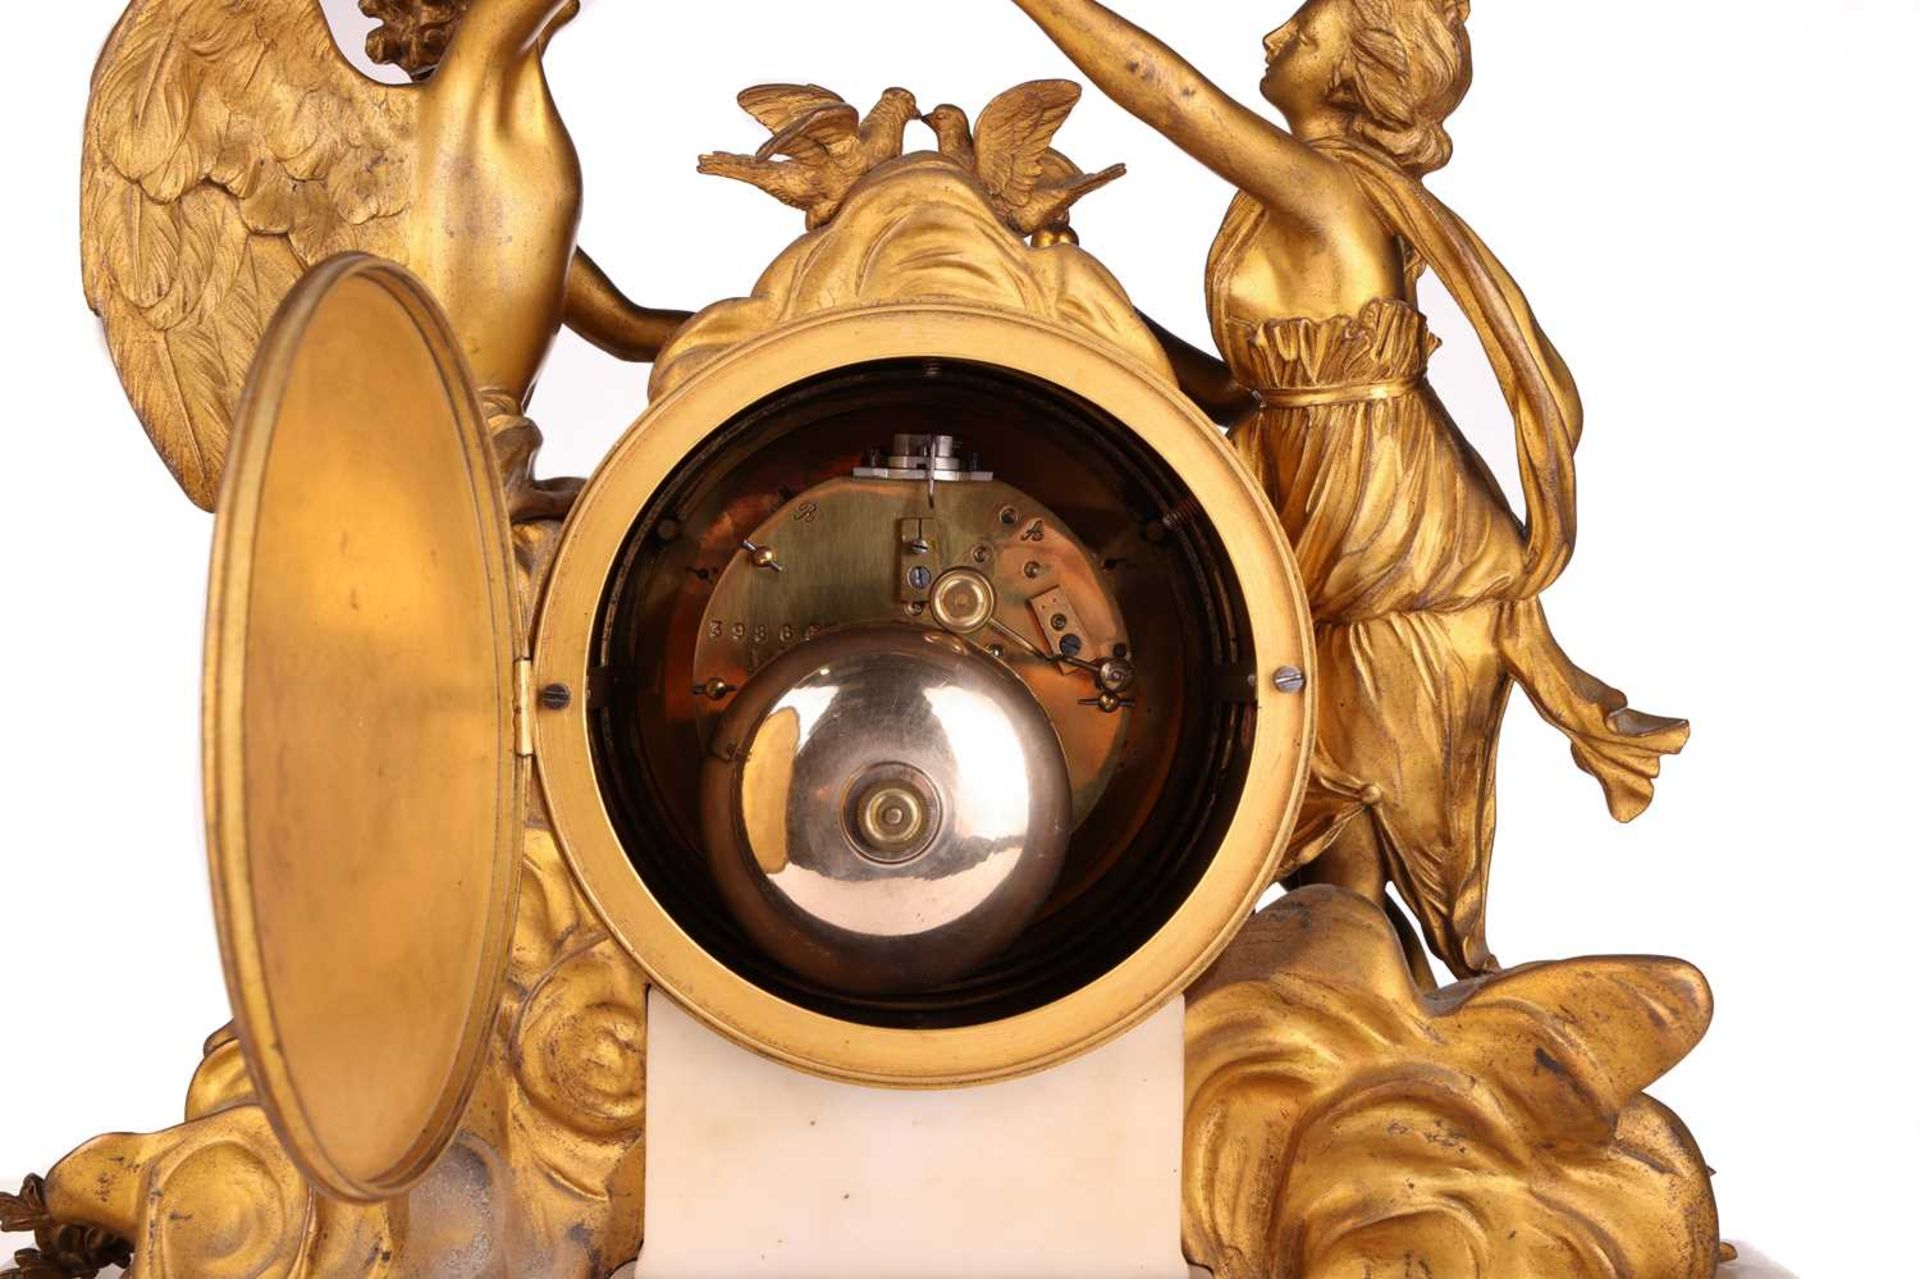 A French Le Roy et Fils (?) ormolu and white marble mantel clock with a figural mount allegorical of - Image 6 of 6